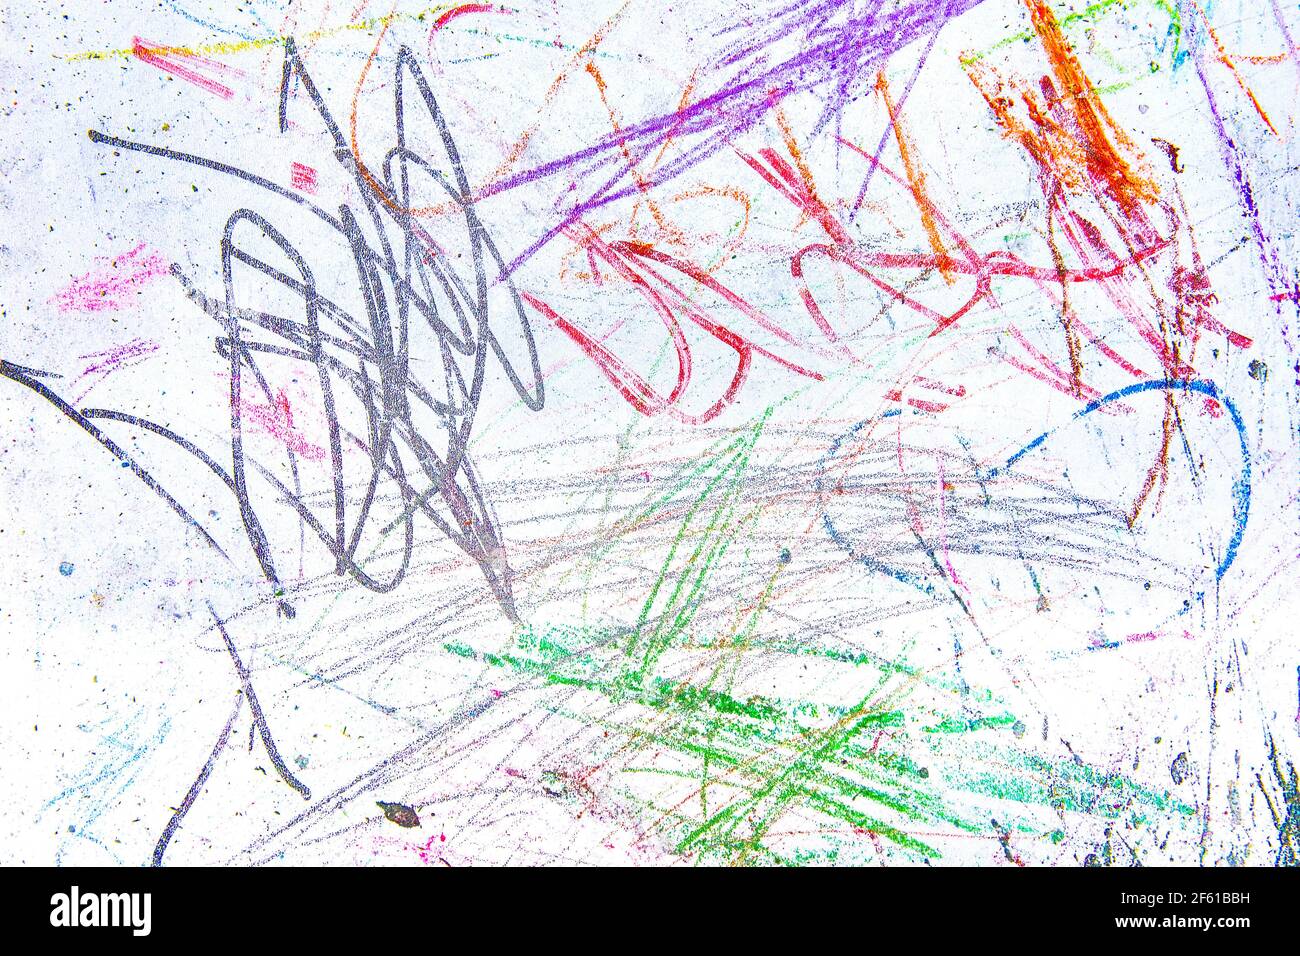 Children s chaotic drawings in colorful chalk on a white blackboard. Abstract pattern texture background. Stock Photo